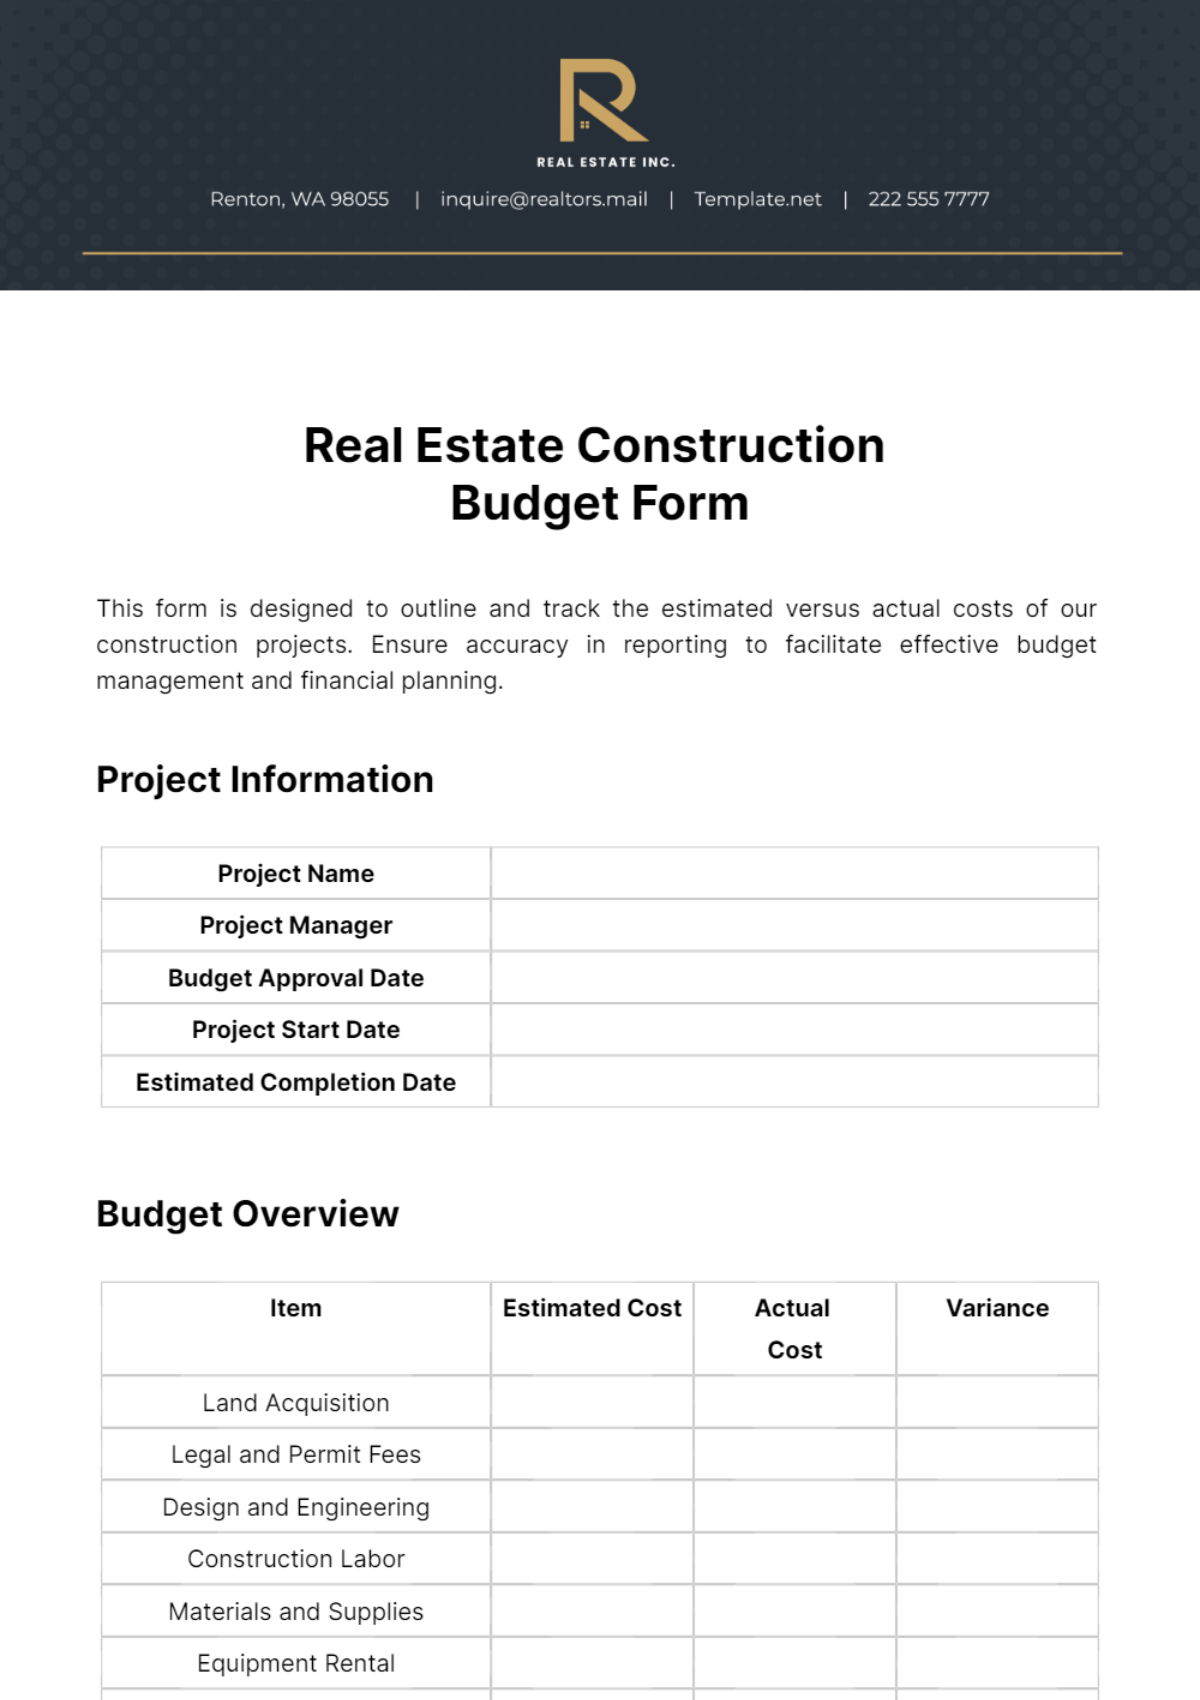 Real Estate Construction Budget Form Template